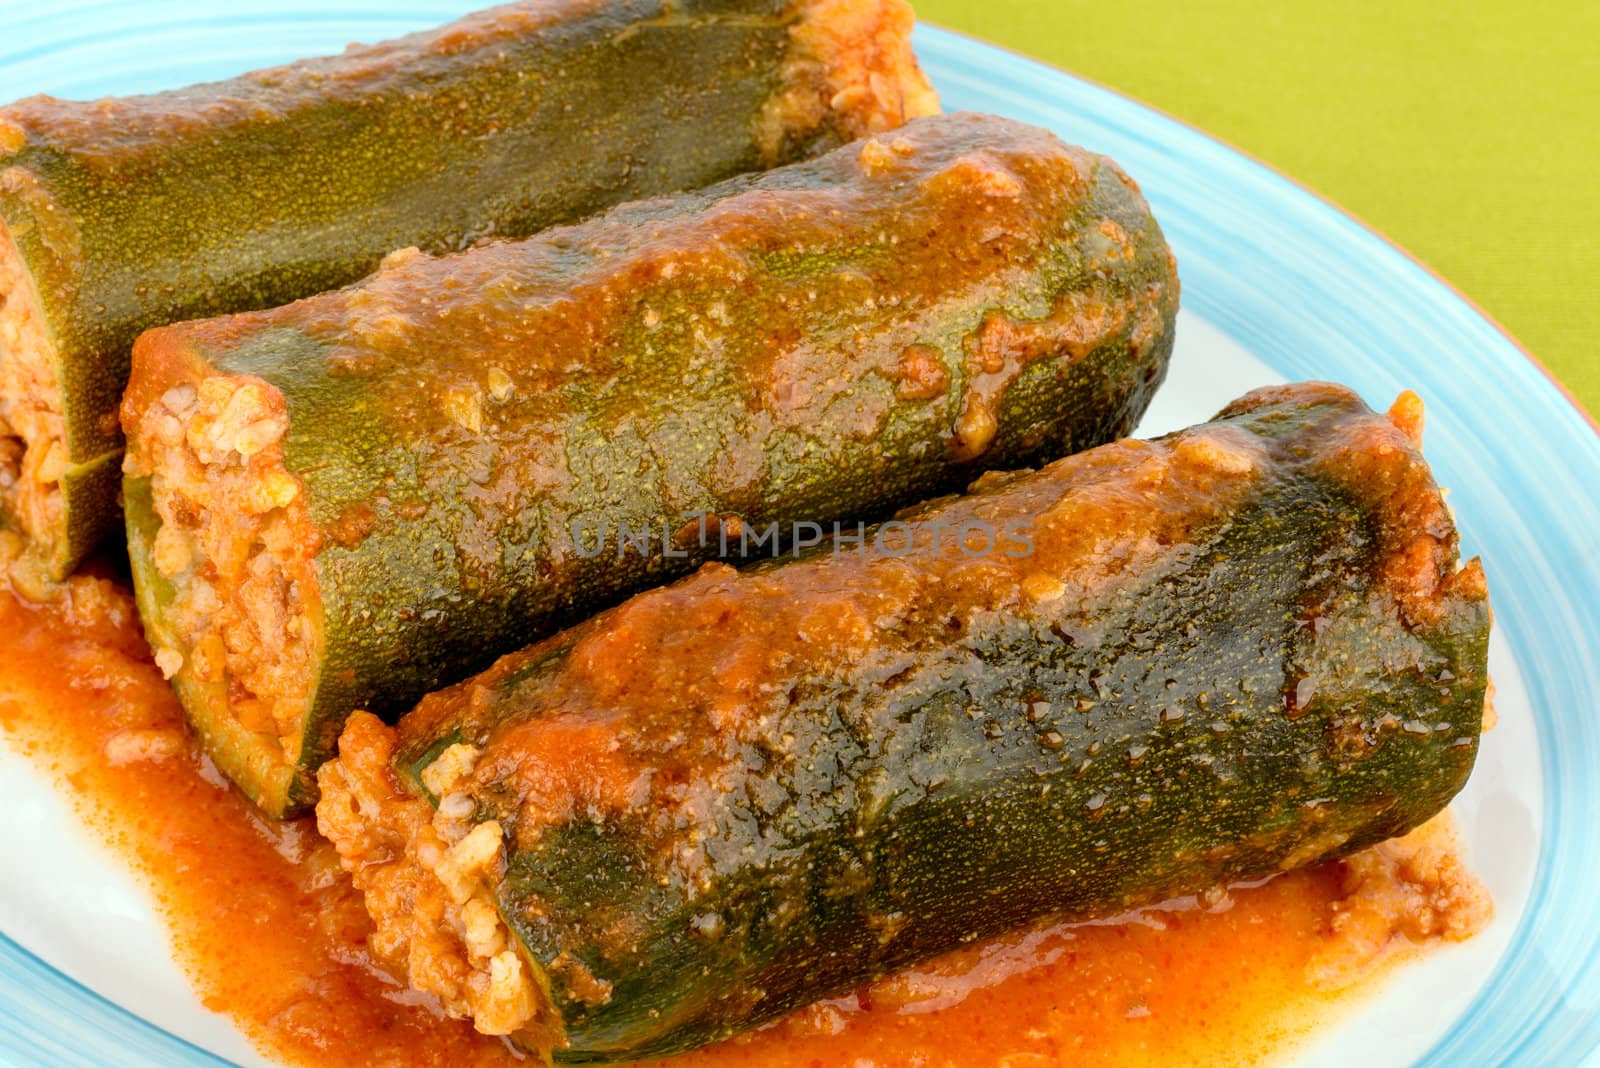 Three pieces of zucchini stuffed with rice and meat.